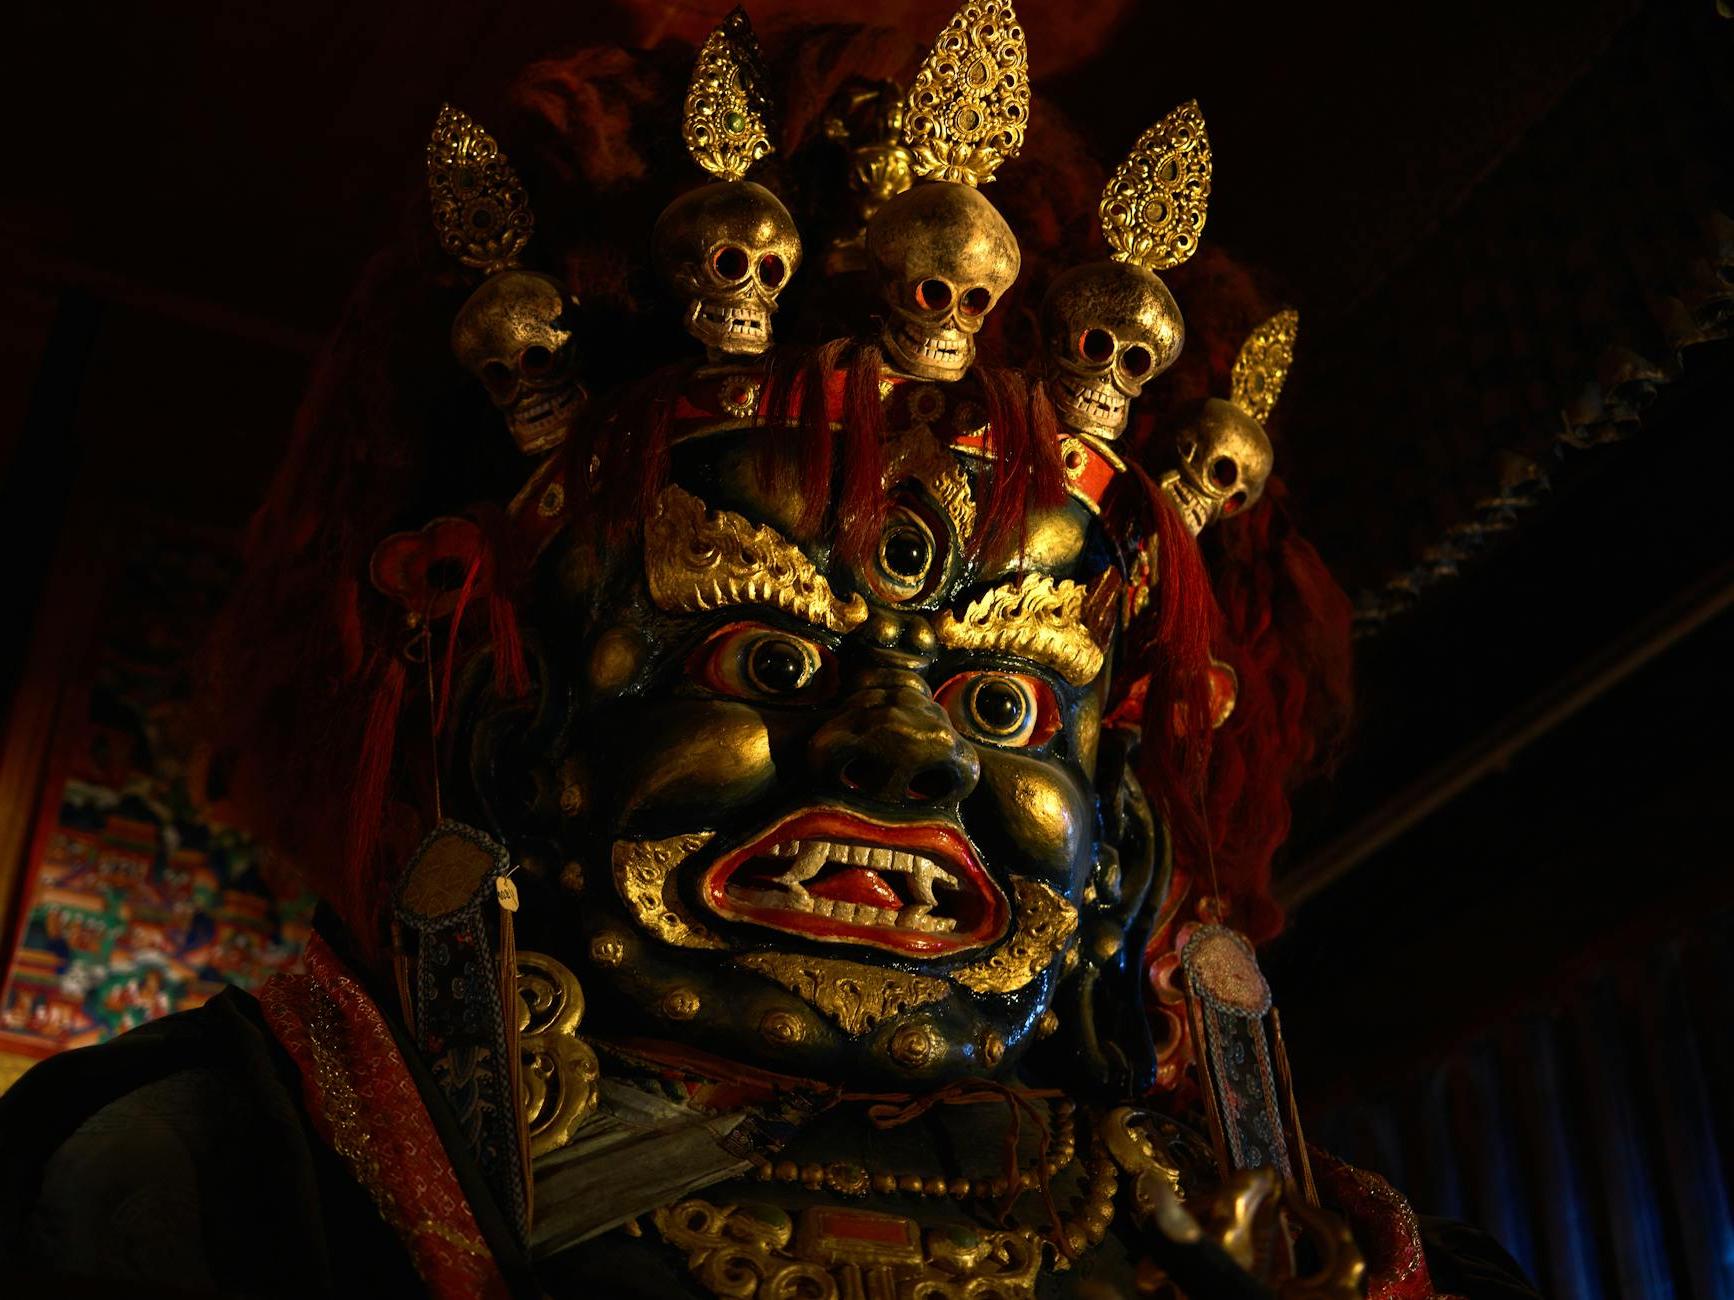 From below of Tsam mystery mask with gilded human face and third eye and pig nose and fangs among teeth and golden circles around face and full head of red hair decorated with red hairband adorned with golden skulls